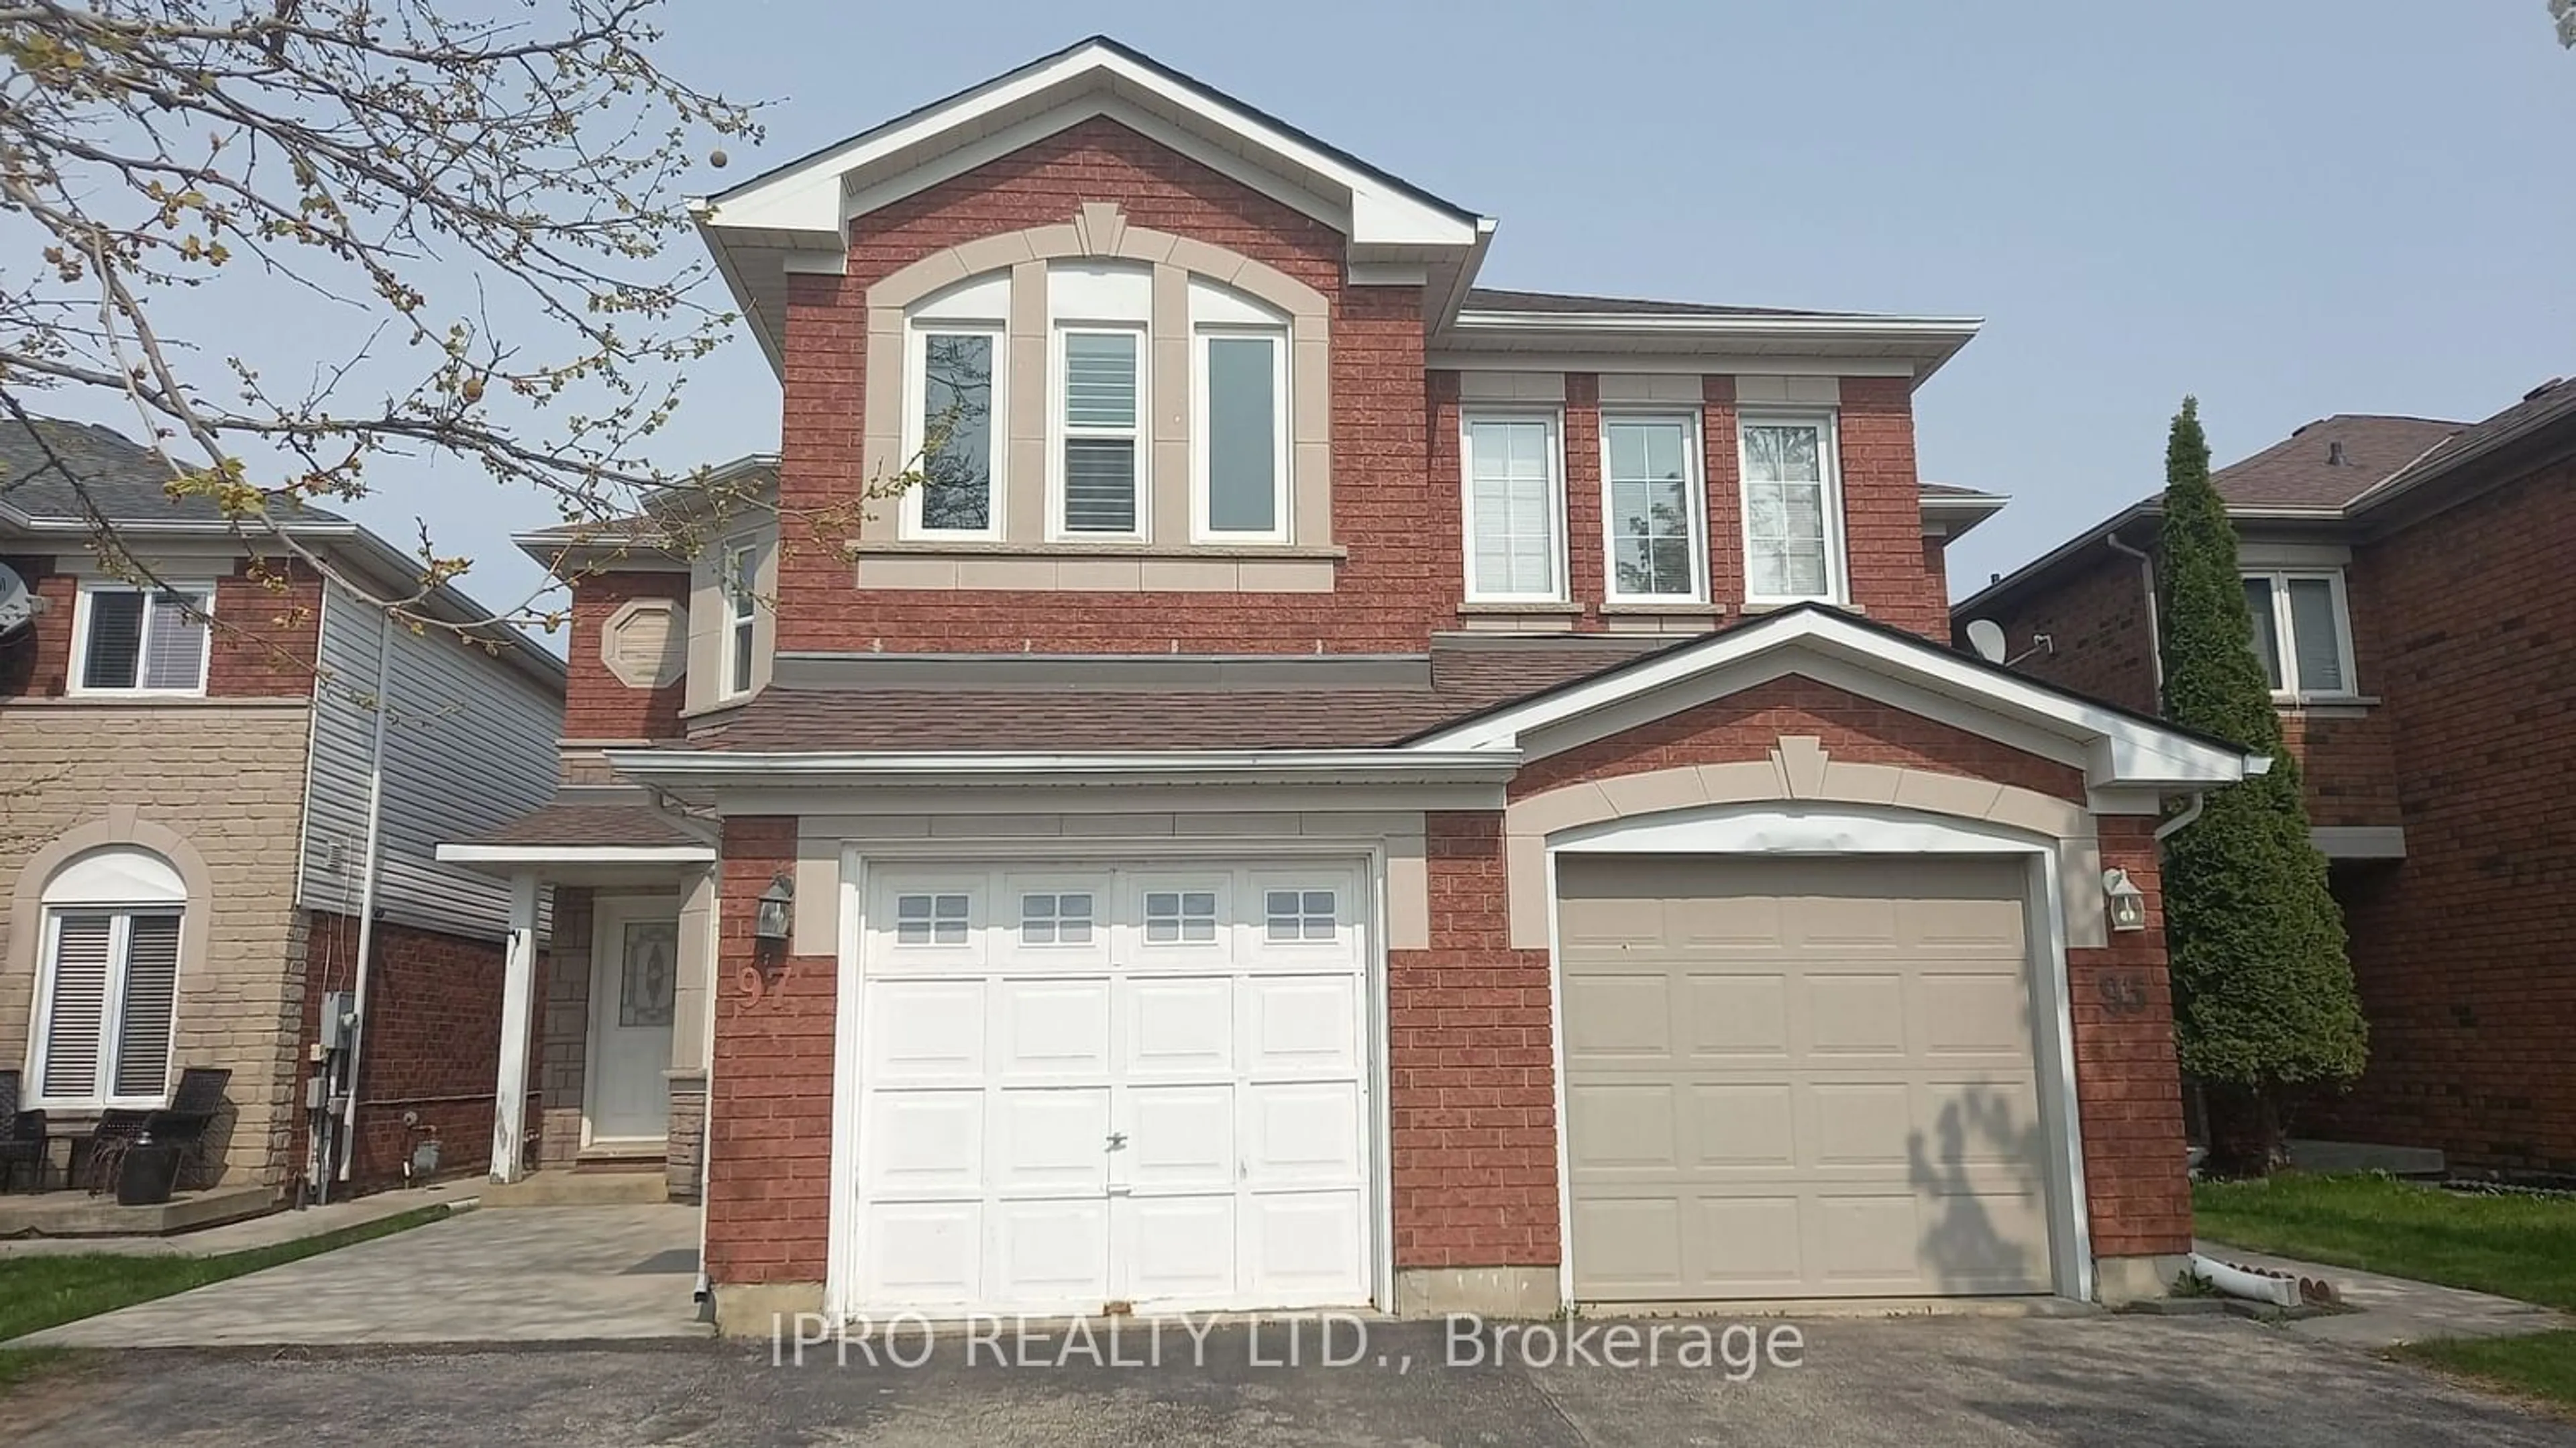 Home with brick exterior material for 97 Essex Point Dr, Cambridge Ontario N1T 1W5